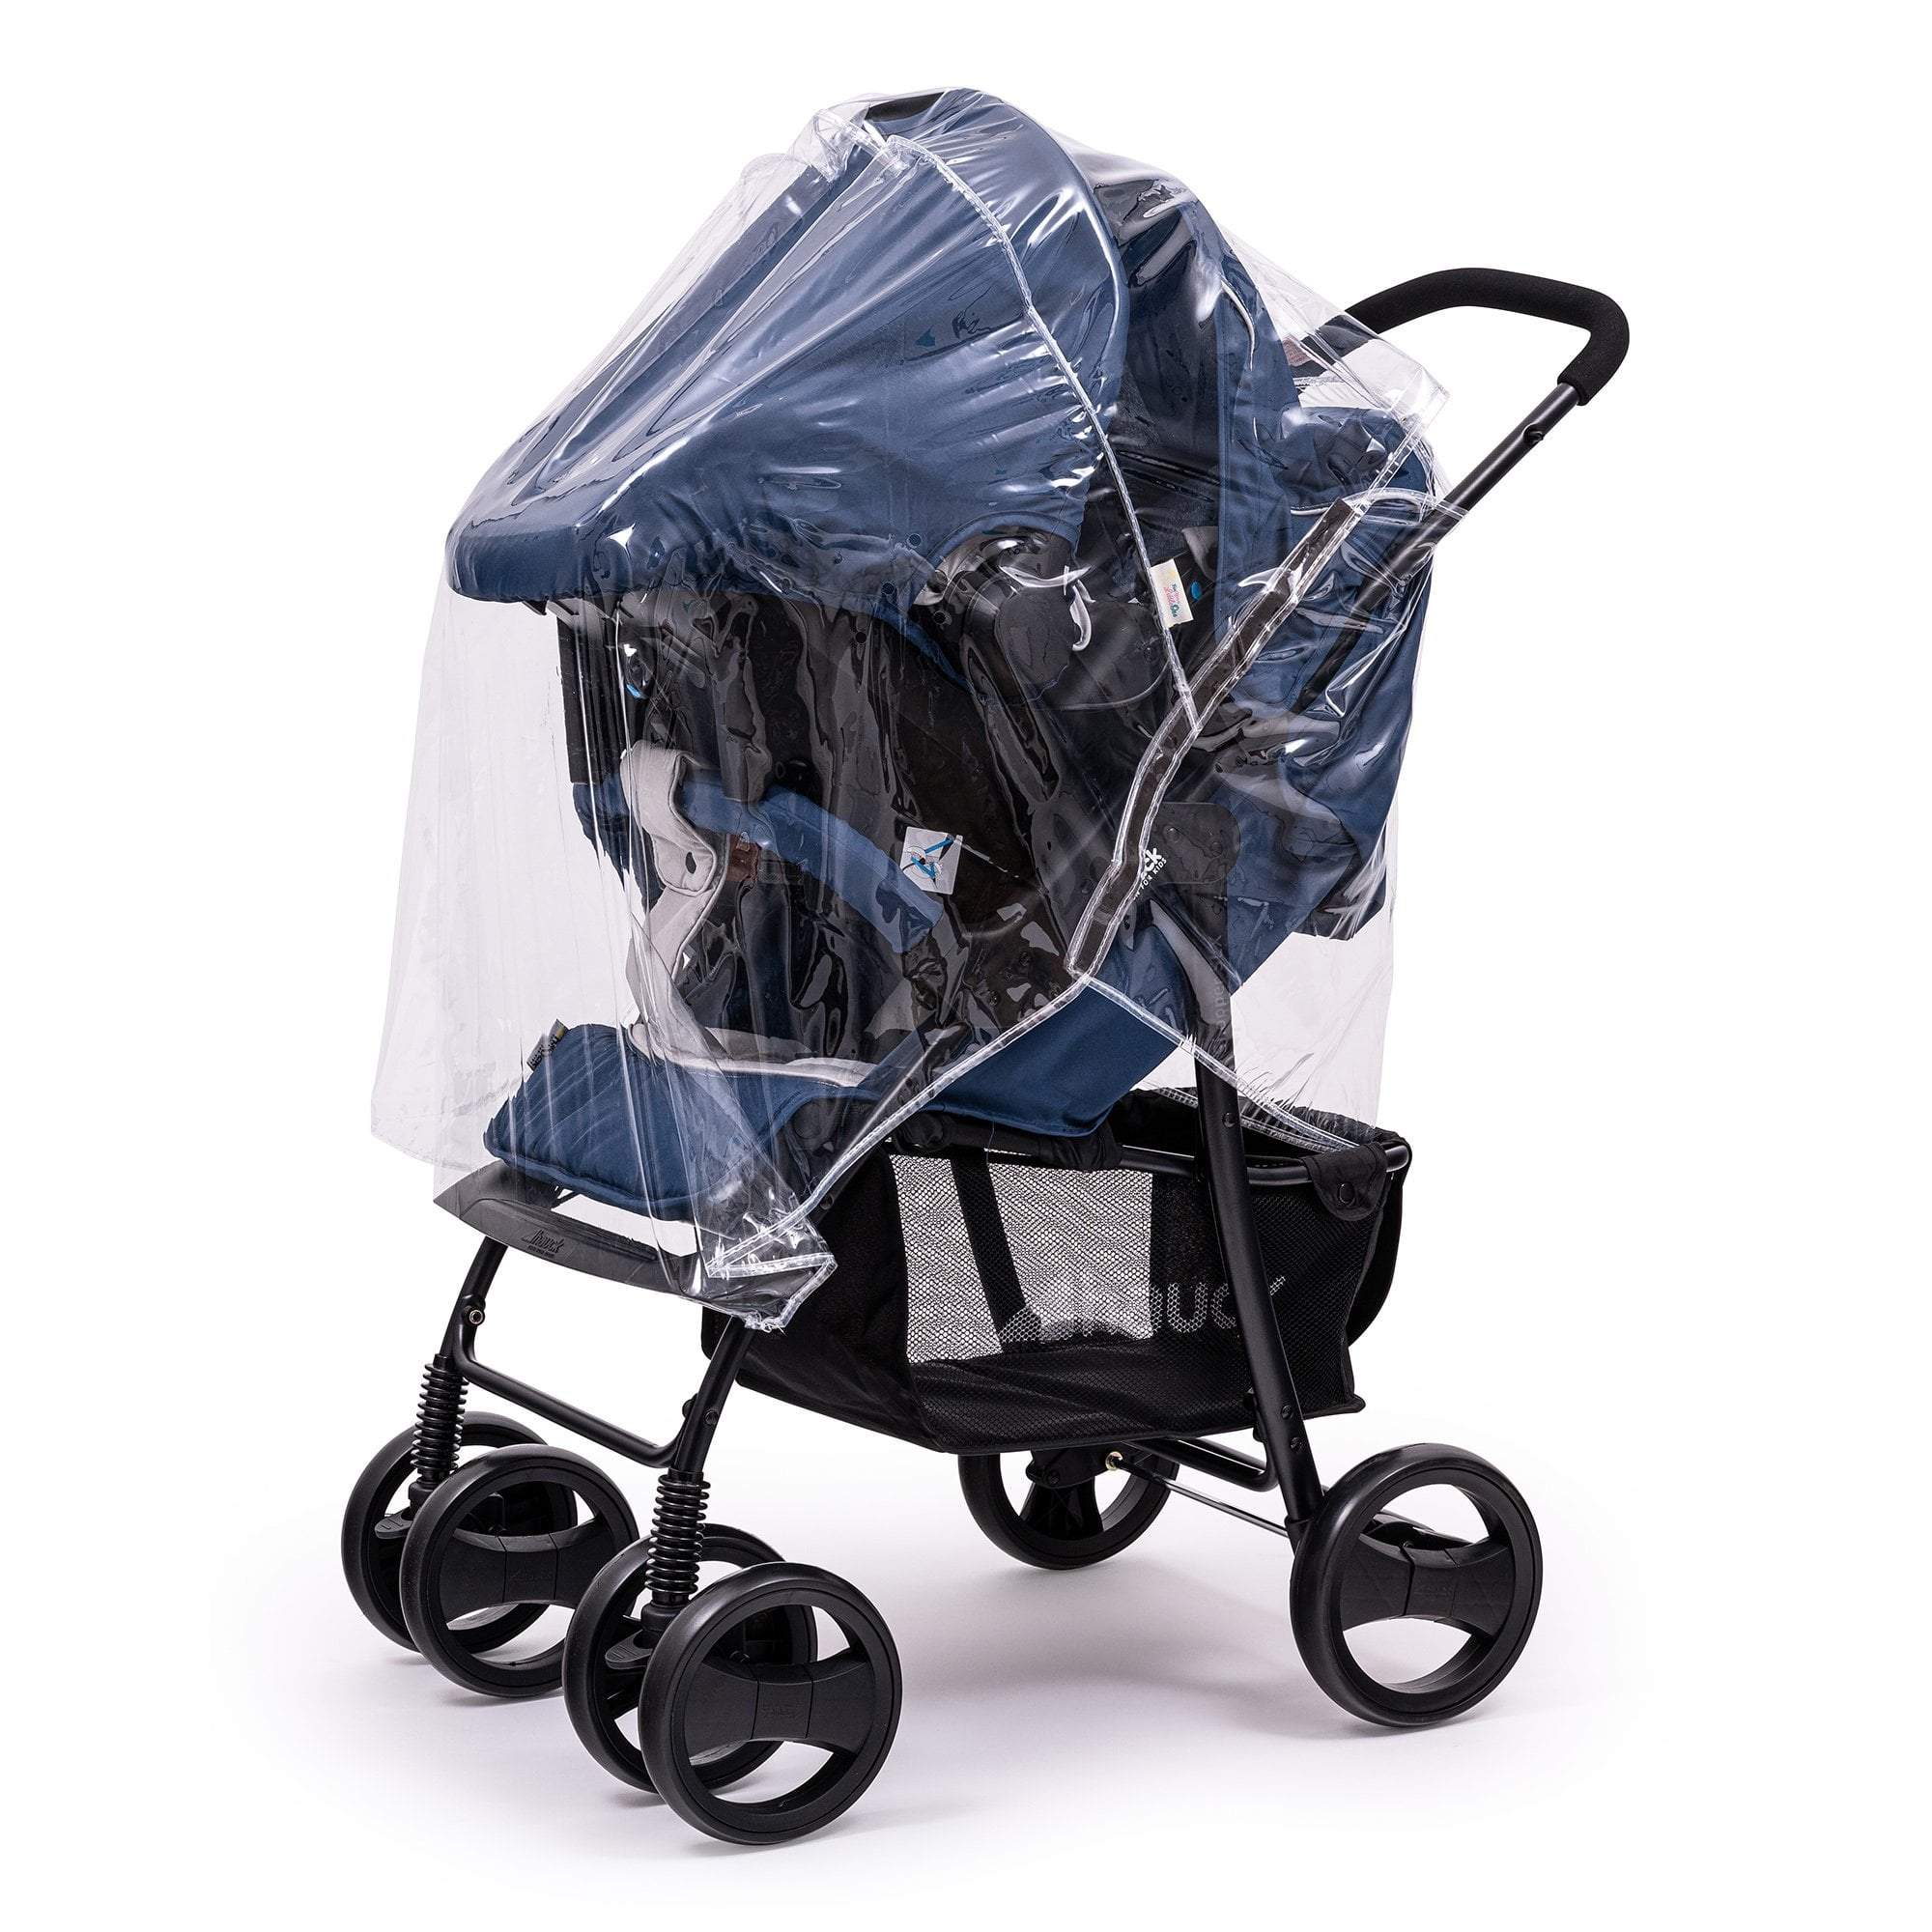 Travel System Raincover Compatible with Mutsy - Fits All Models - For Your Little One